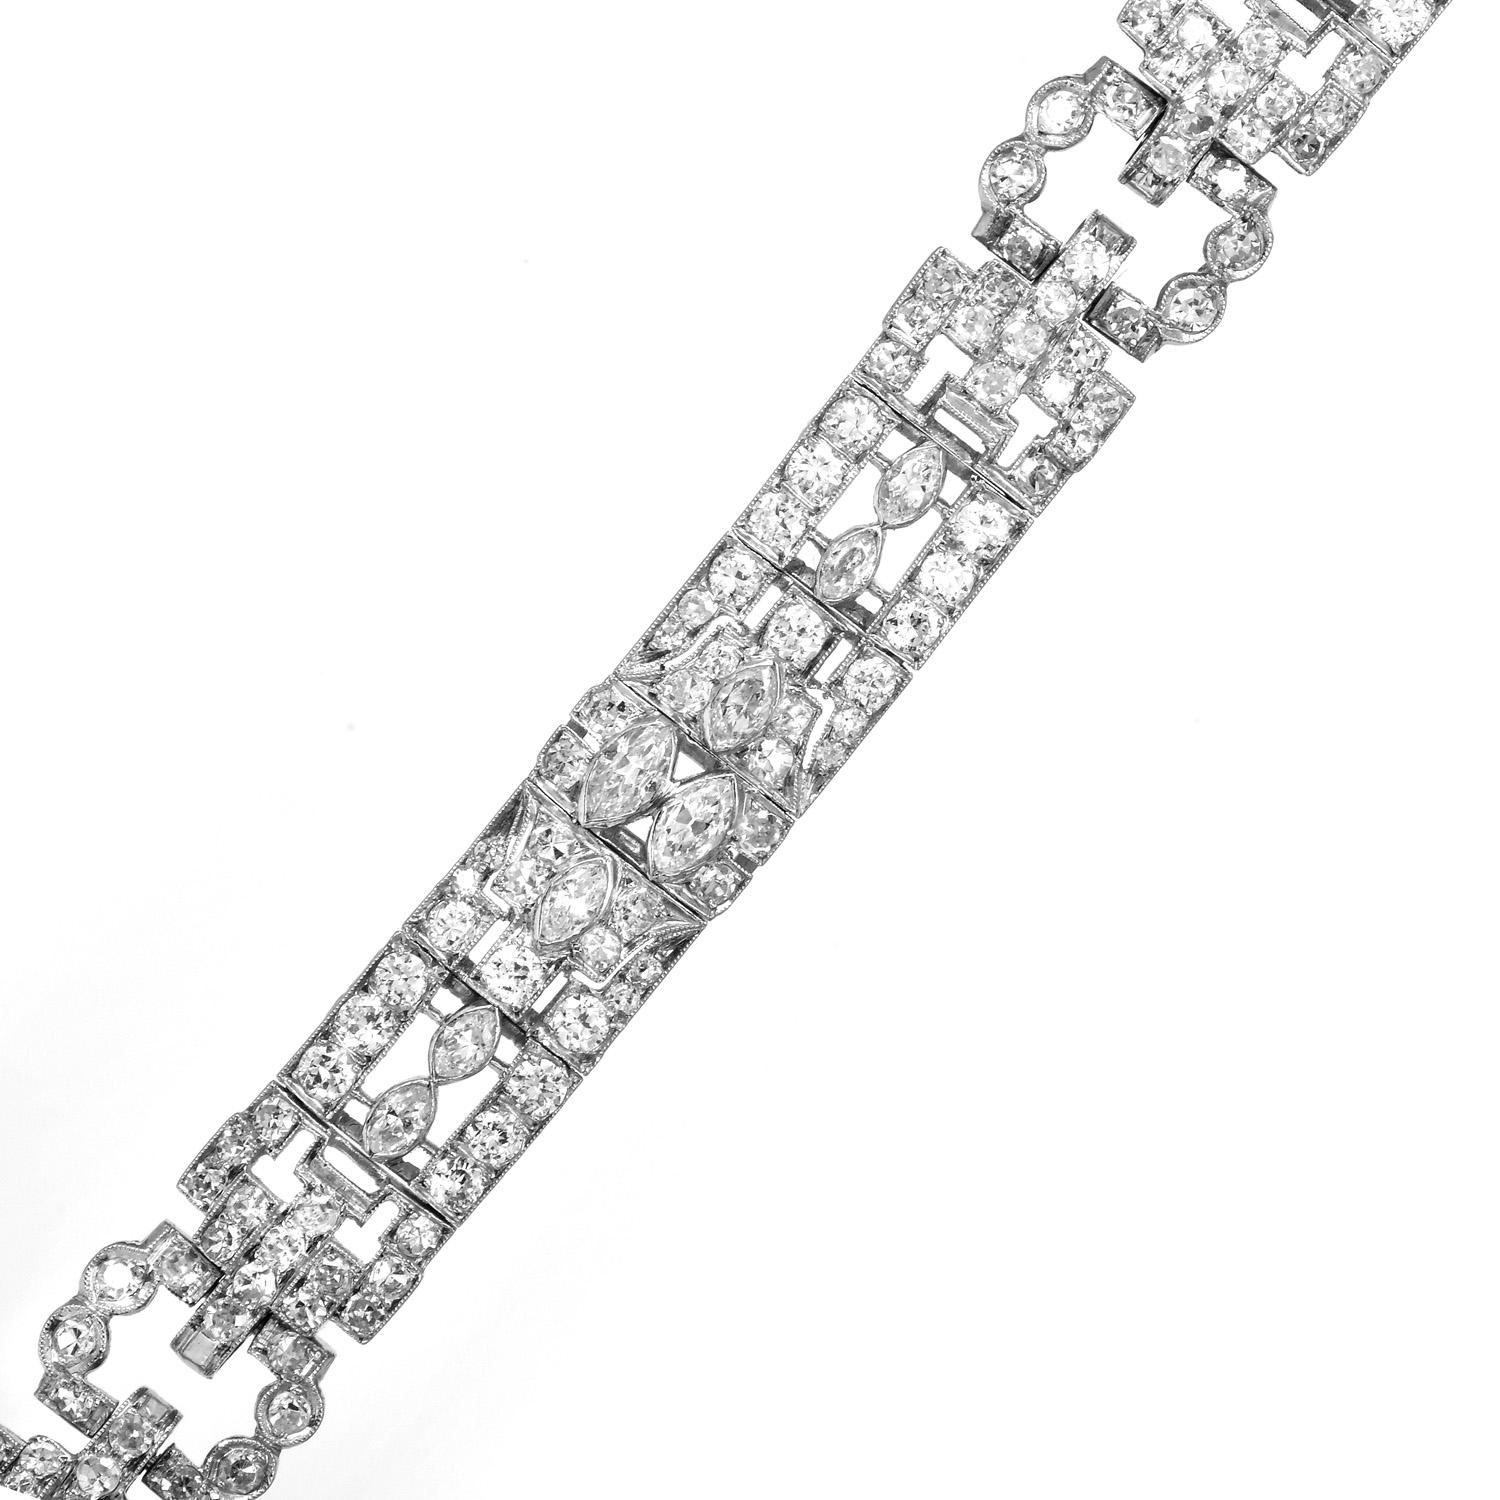 Experience the delicate beauty of this Art Deco Geometric Link Bracelet.

This remarkable elegant and vivid bracelet is crafted in quality platinum.  The center of the links showcases 24, Marquise cut genuine diamonds and a Bezel set. Framing the